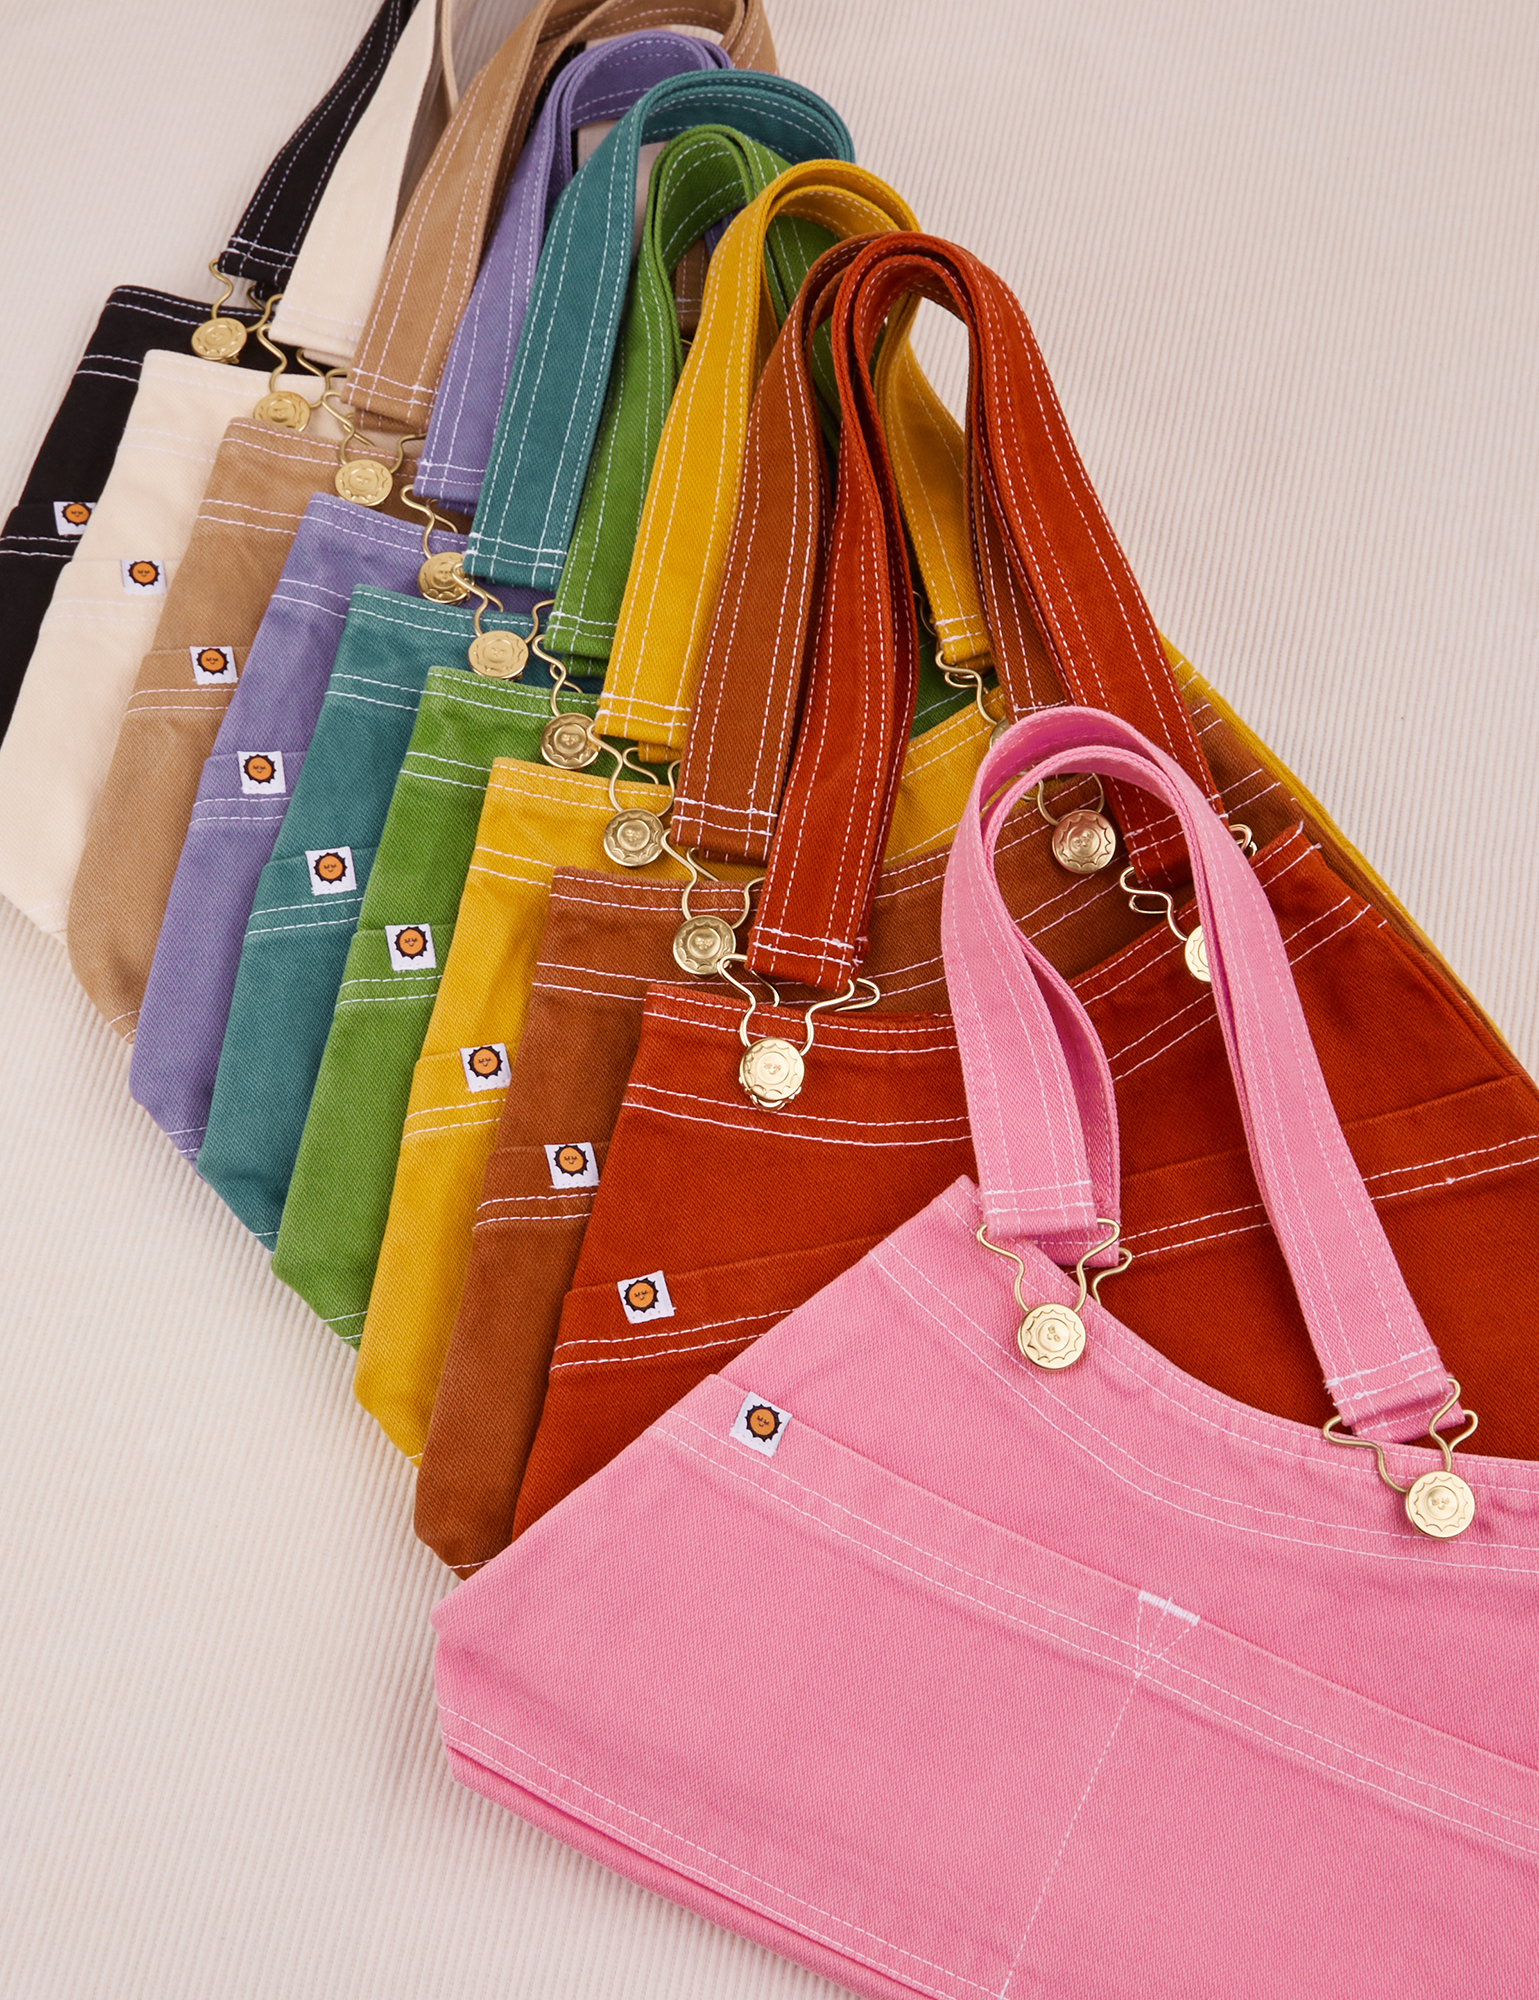 Overall Handbag in an array of colors